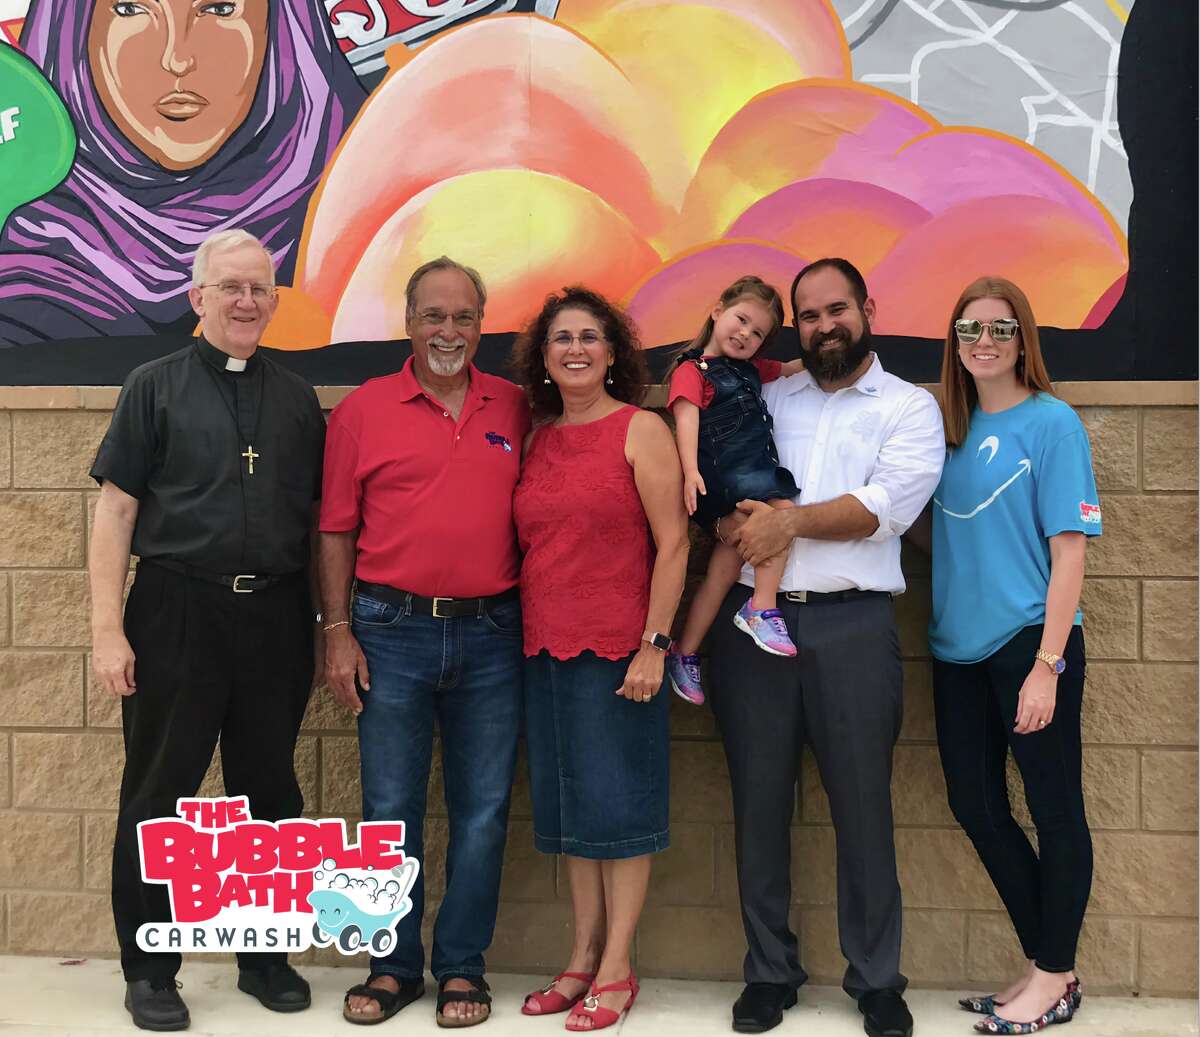 Family-owned and operated, The Bubble Bath Car Wash keeps winning the hearts of San Antonians.